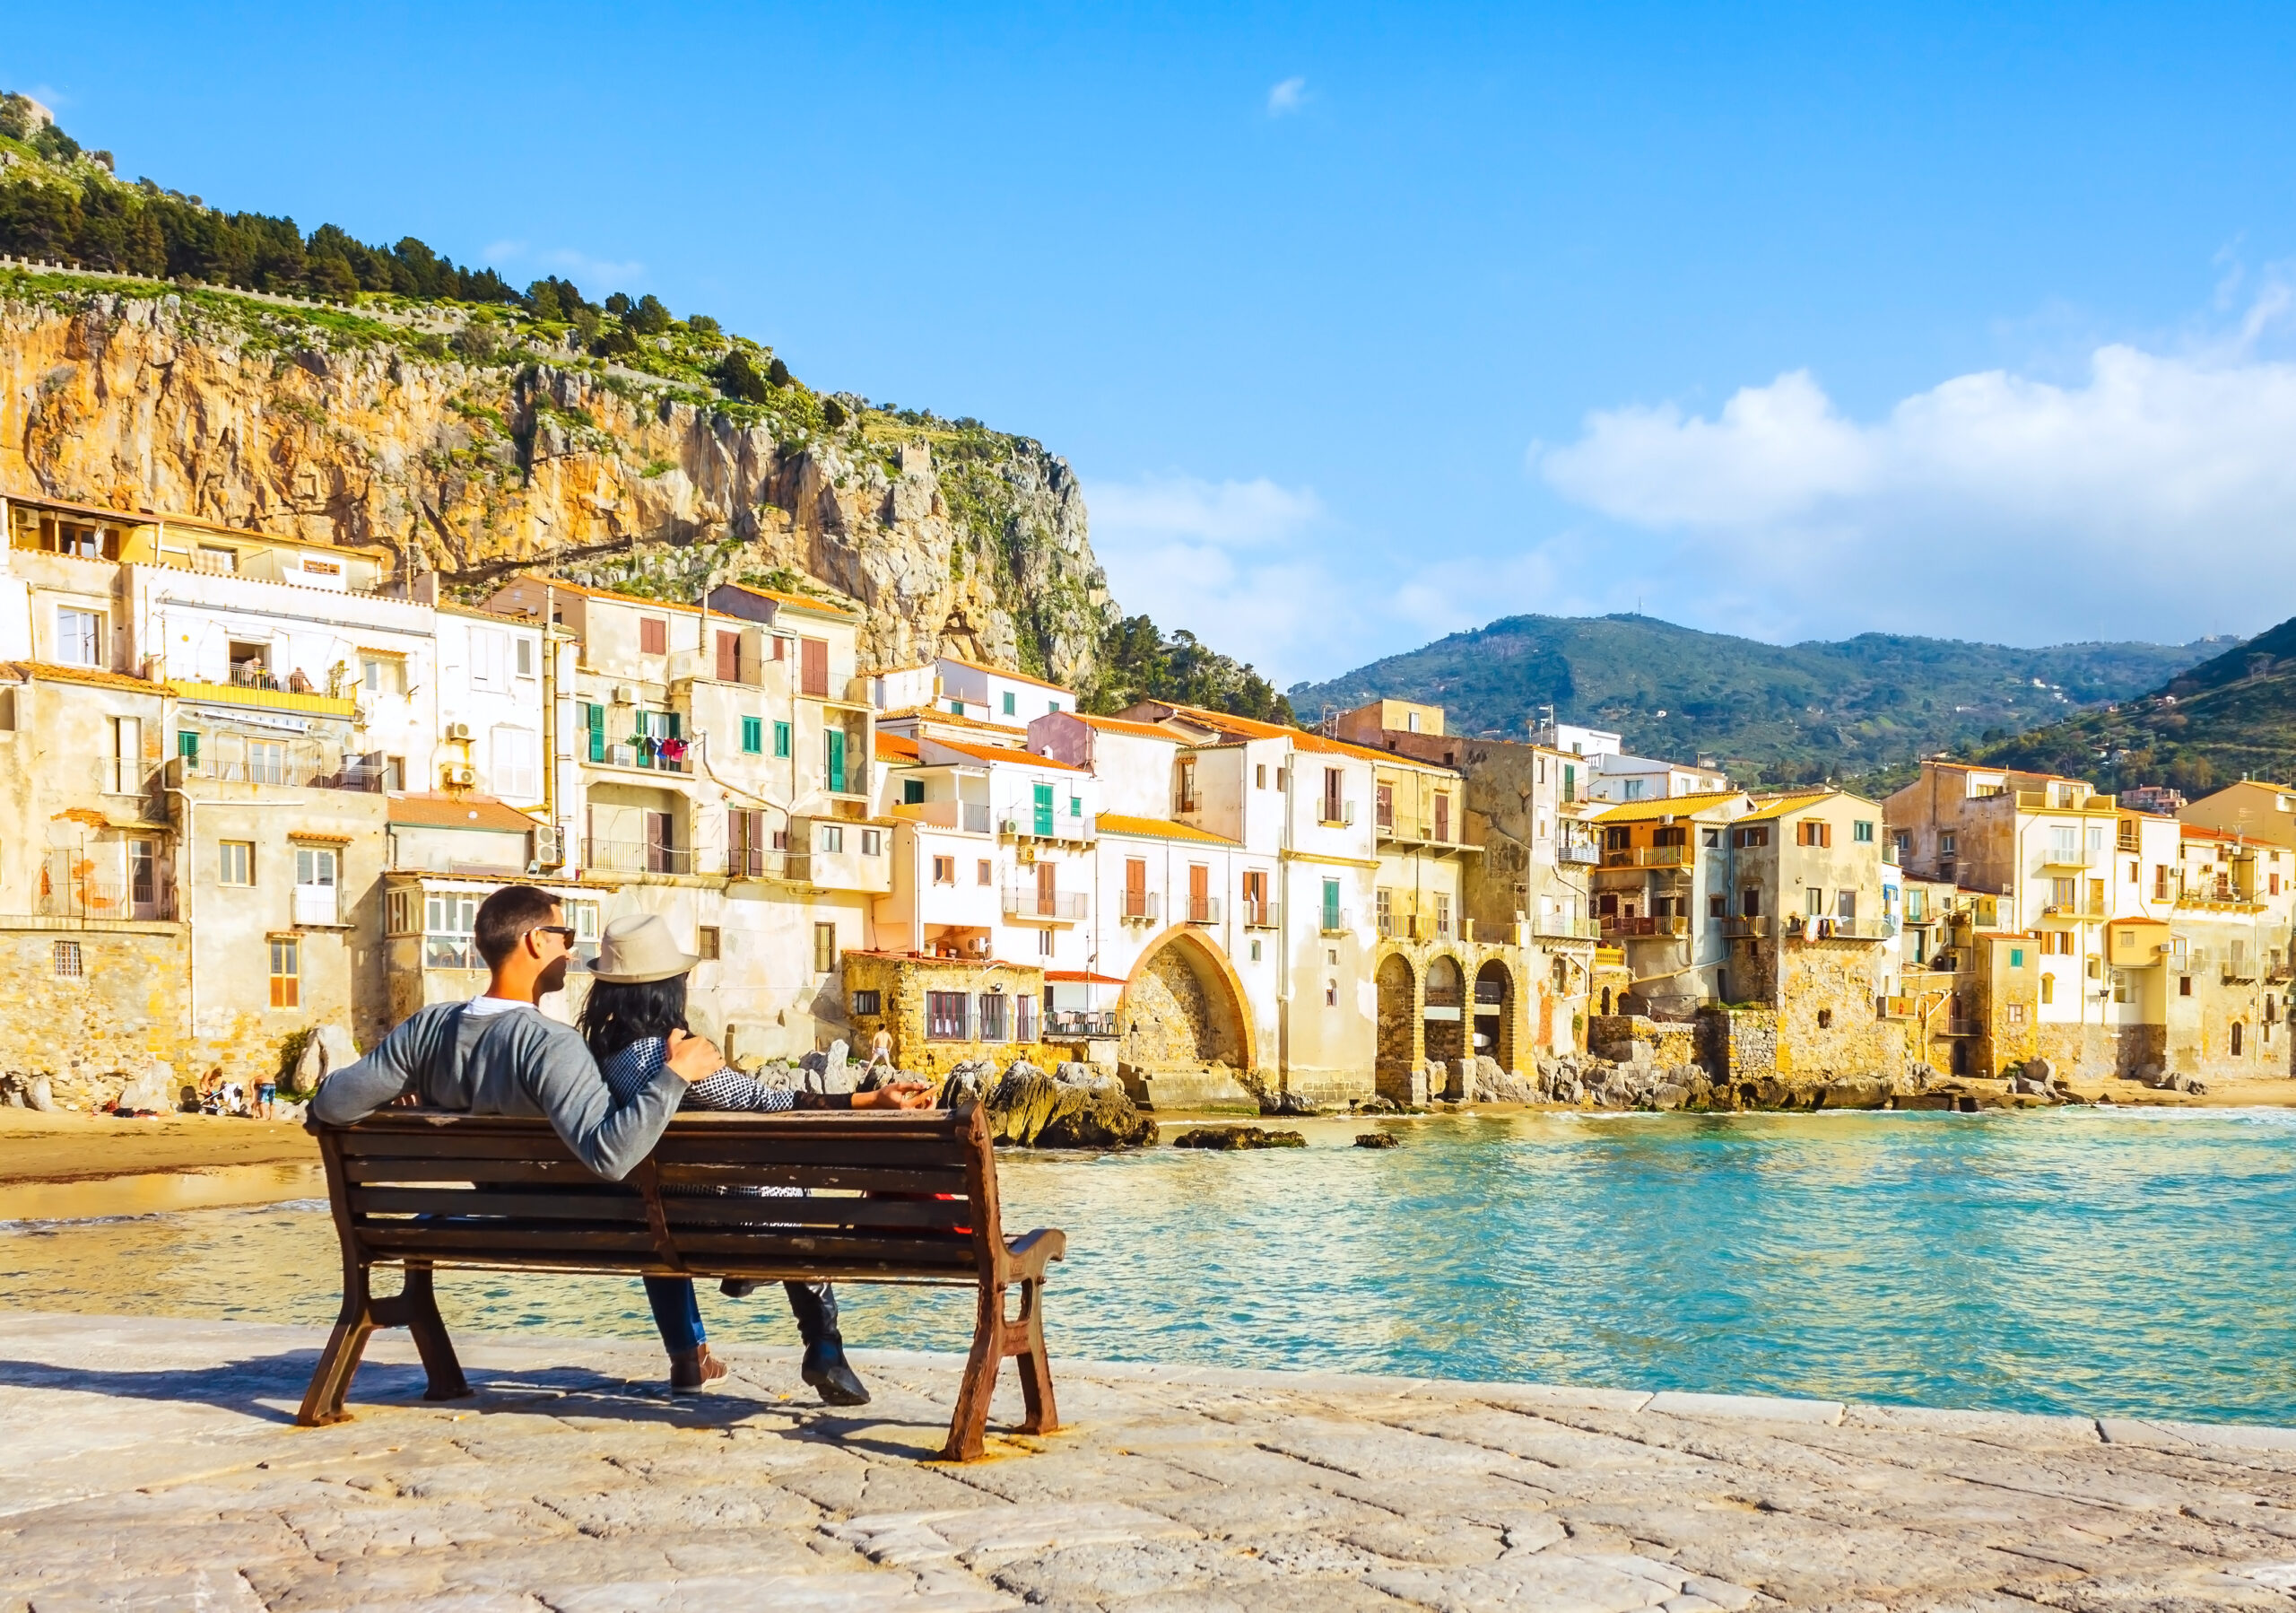 Couple sitting on bench, enjoying view of beach town of Cefalu i